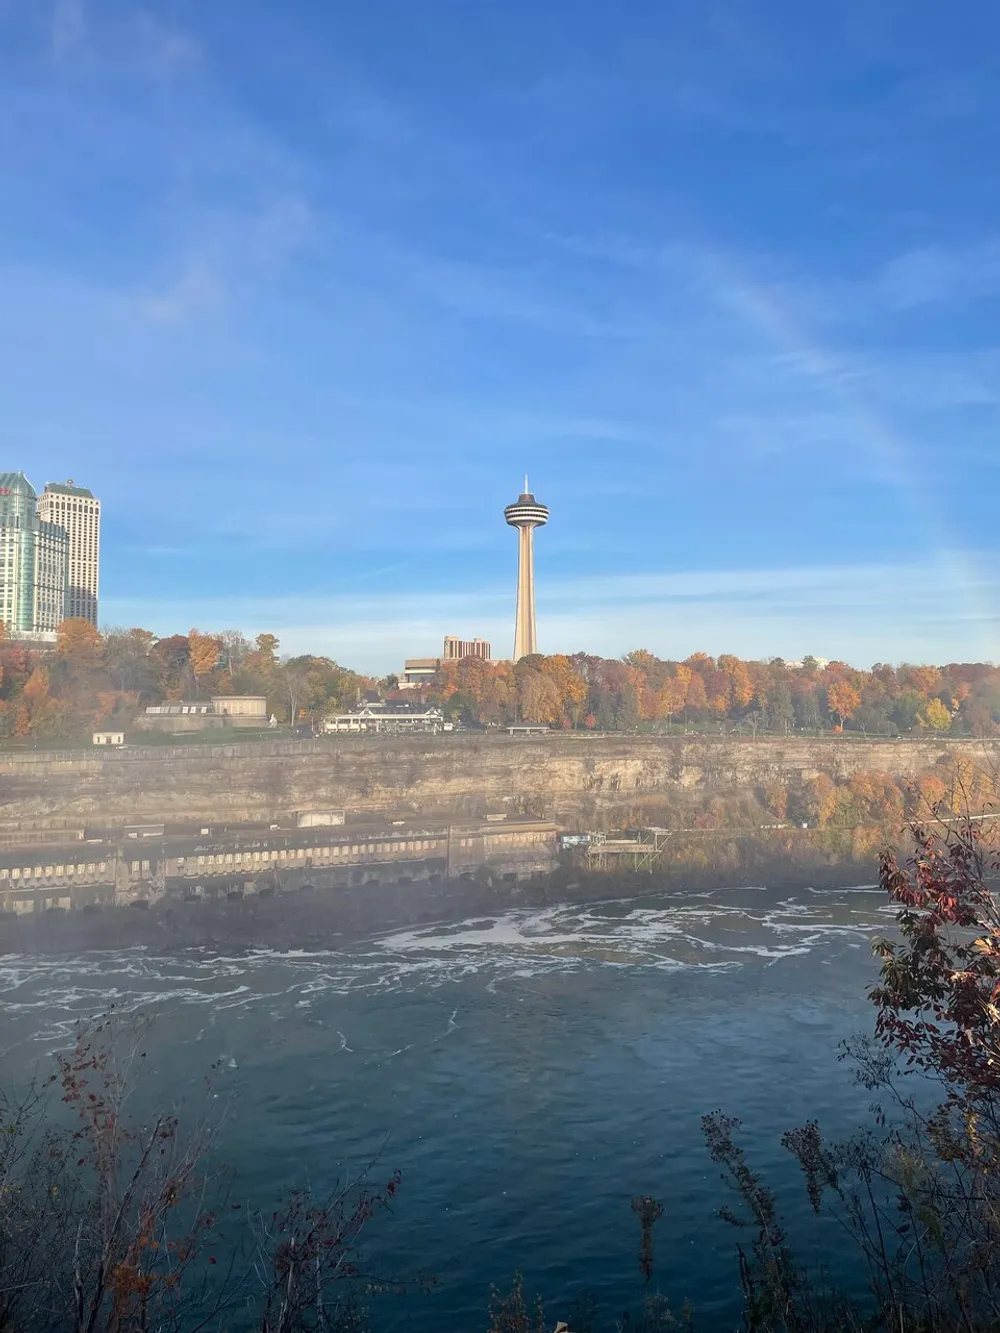 The image shows a scenic view with the Skylon Tower in the background a river in the foreground and autumn-colored trees highlighting a beautiful mix of natural and man-made landscapes